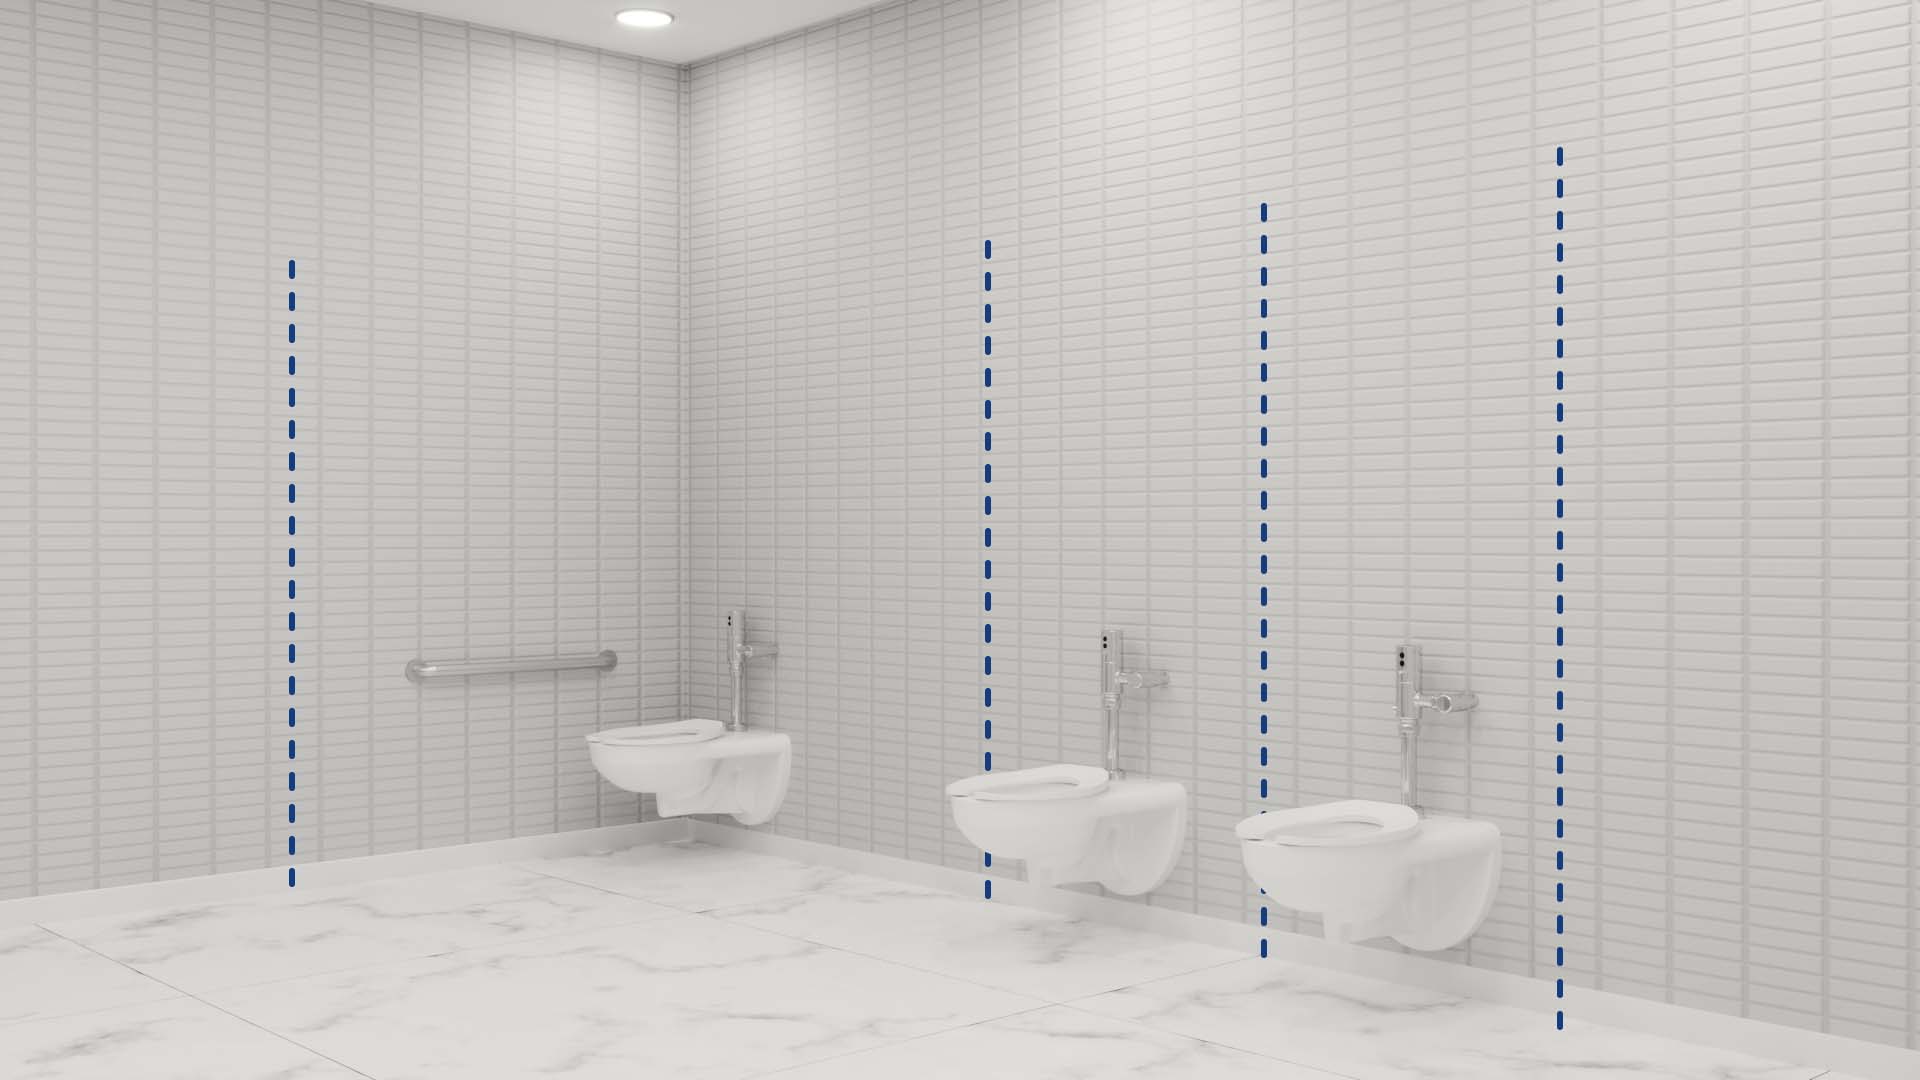 installation animation for bathroom partition